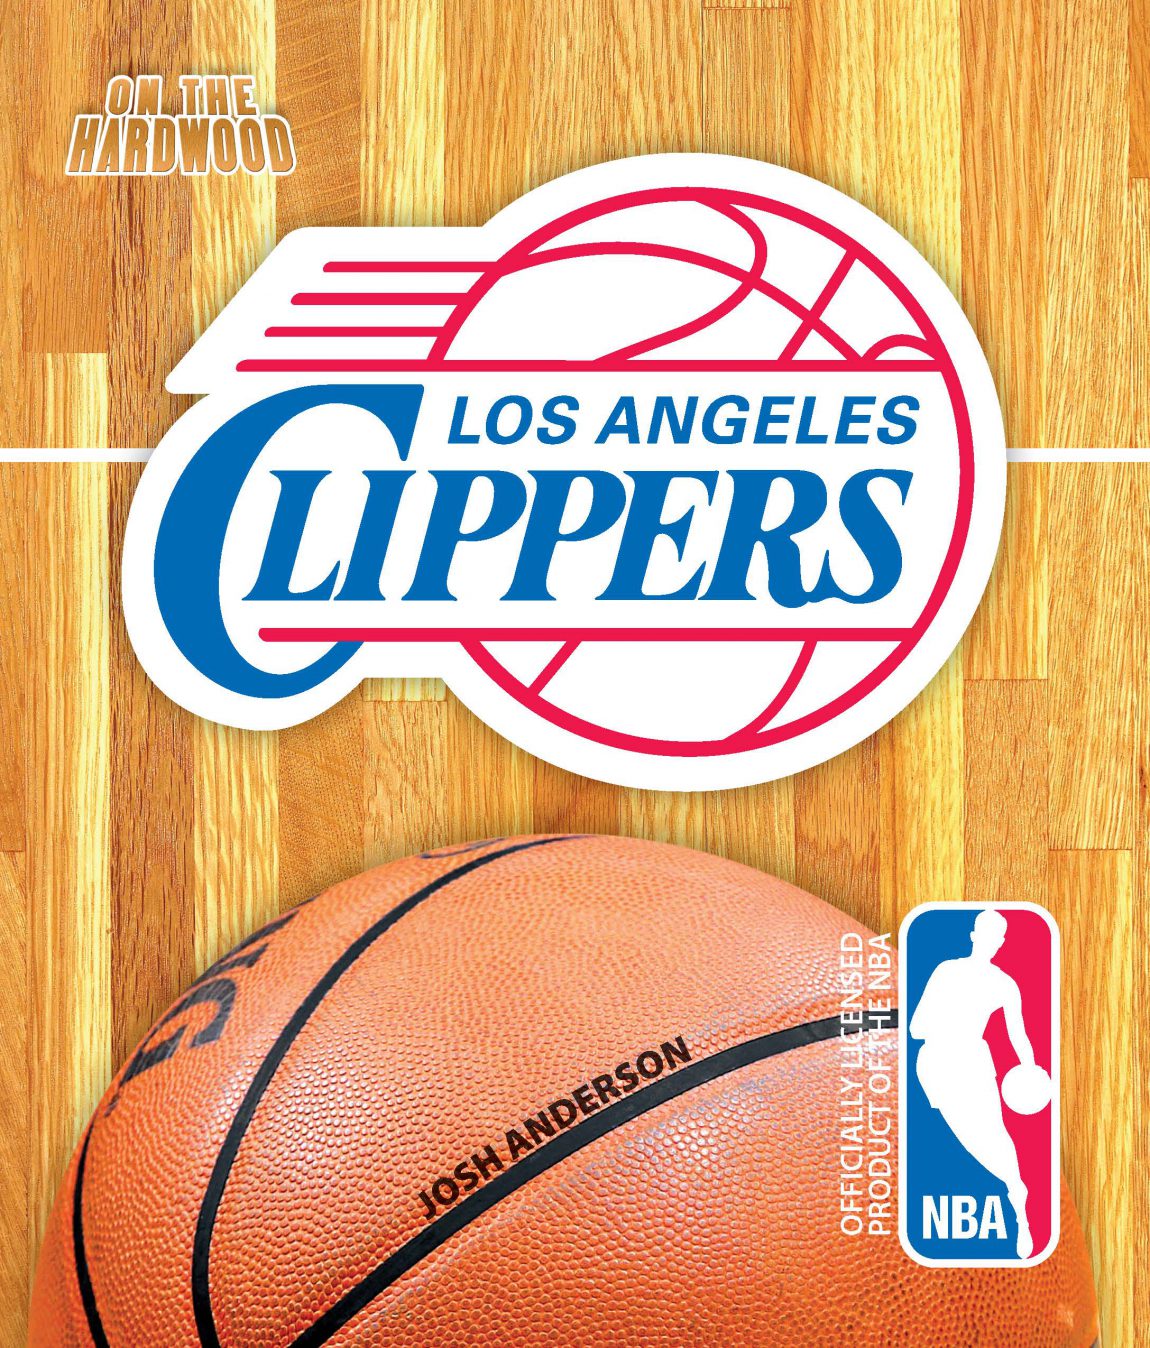 Los-Angeles-Clippers.jpg